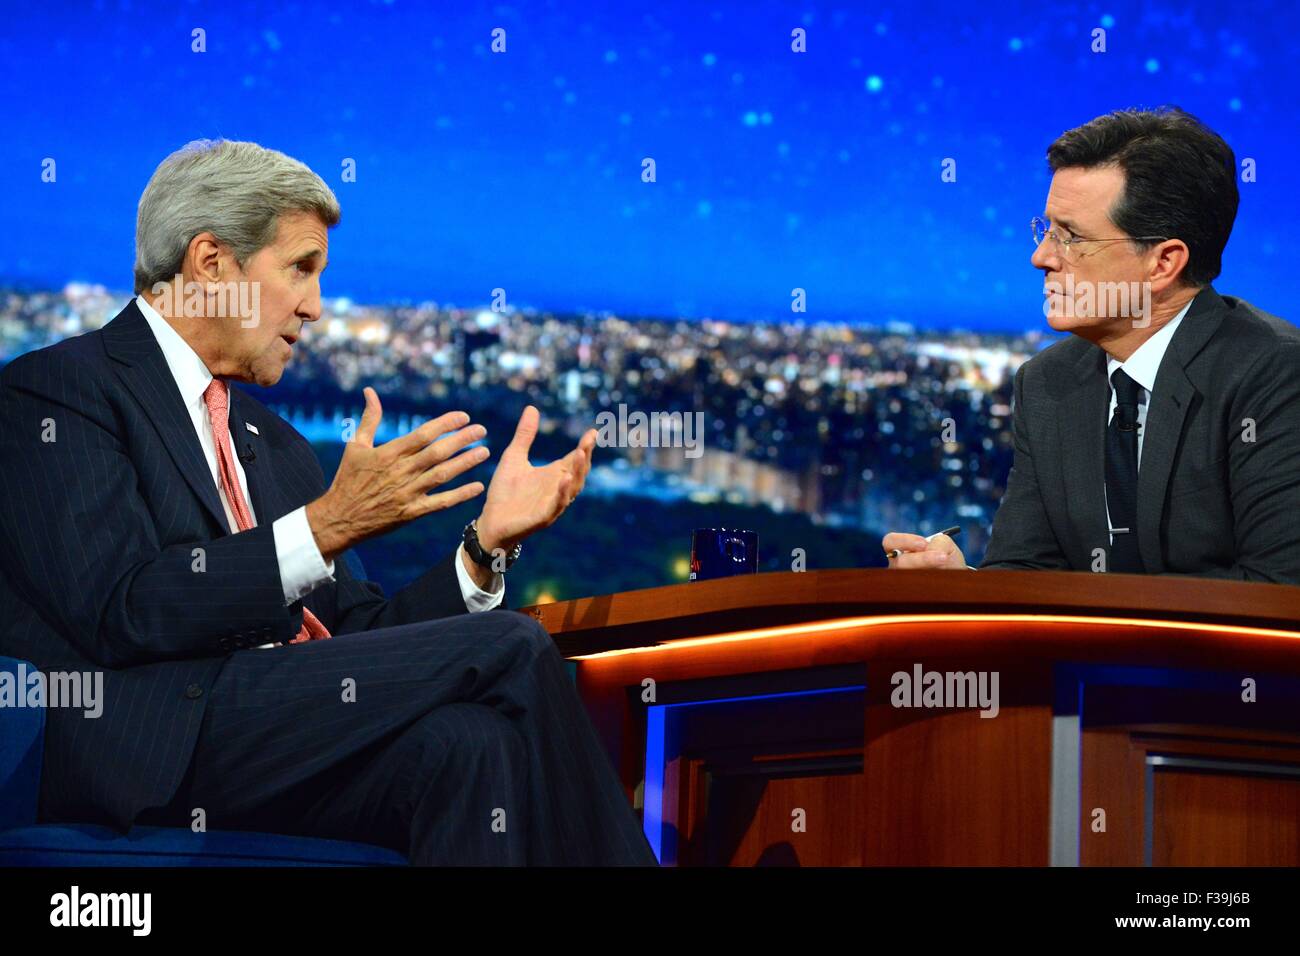 U.S. Secretary of State John Kerry makes a guest appearance on The Late Show with Stephen Colbert October 1, 2015 in New York, New York. Stock Photo